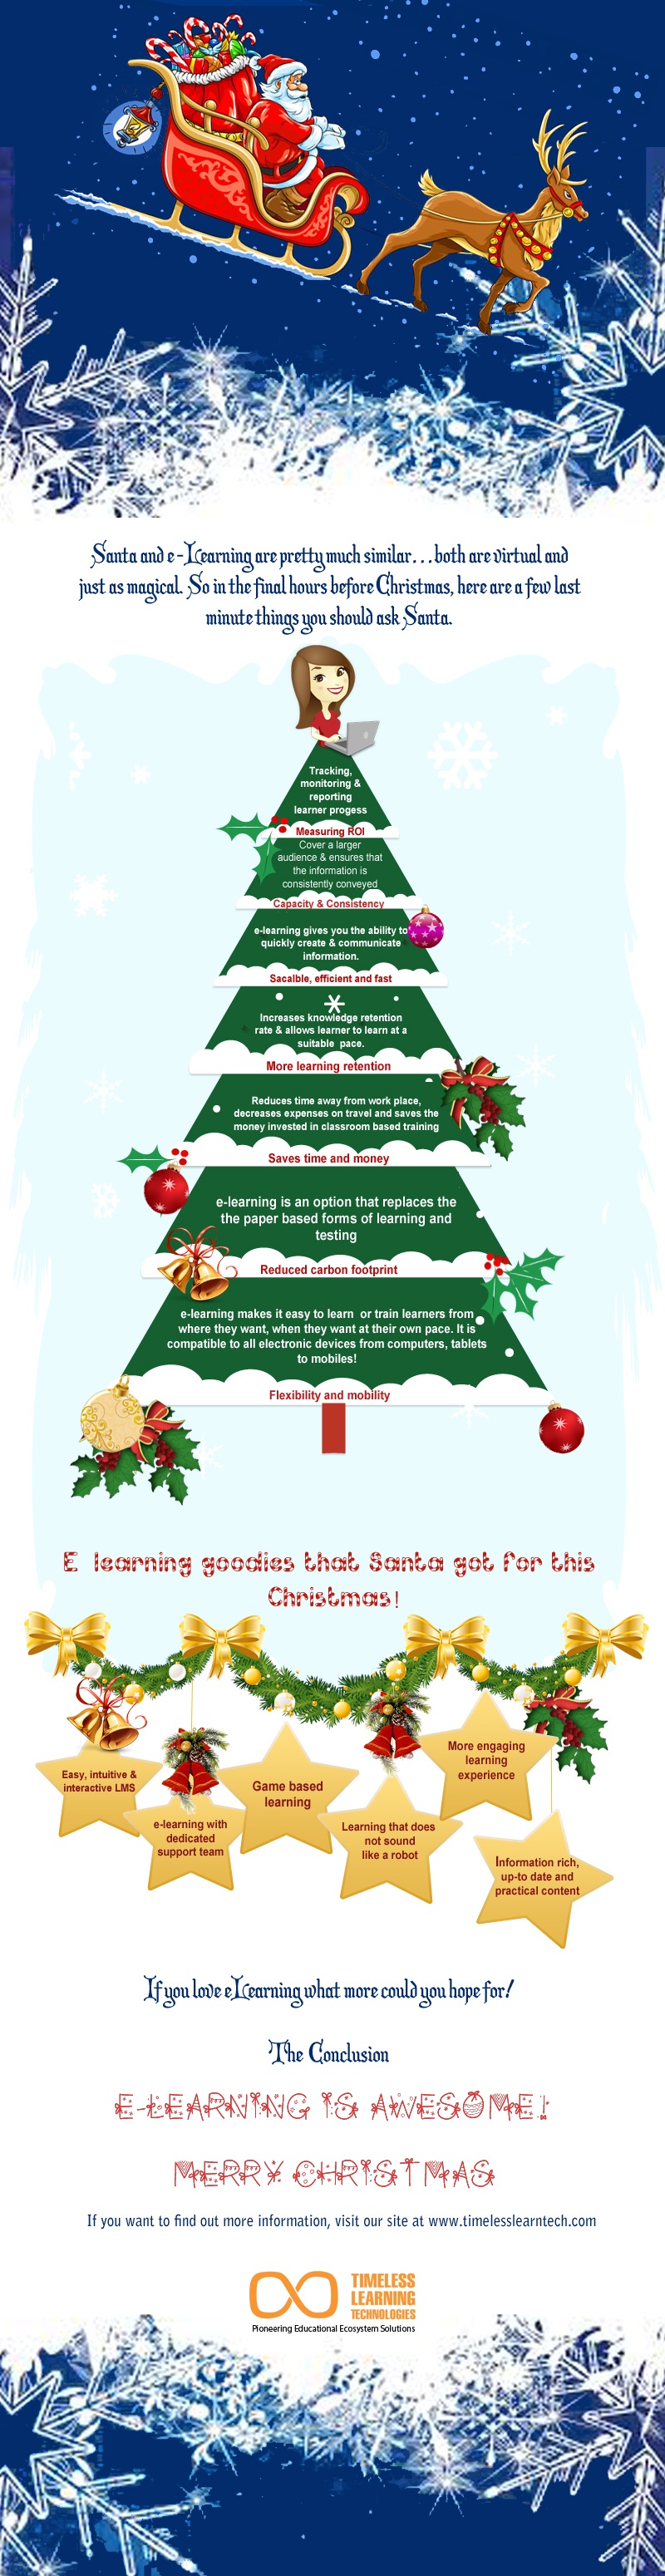 E-learning Goodies that Santa Got Infographic